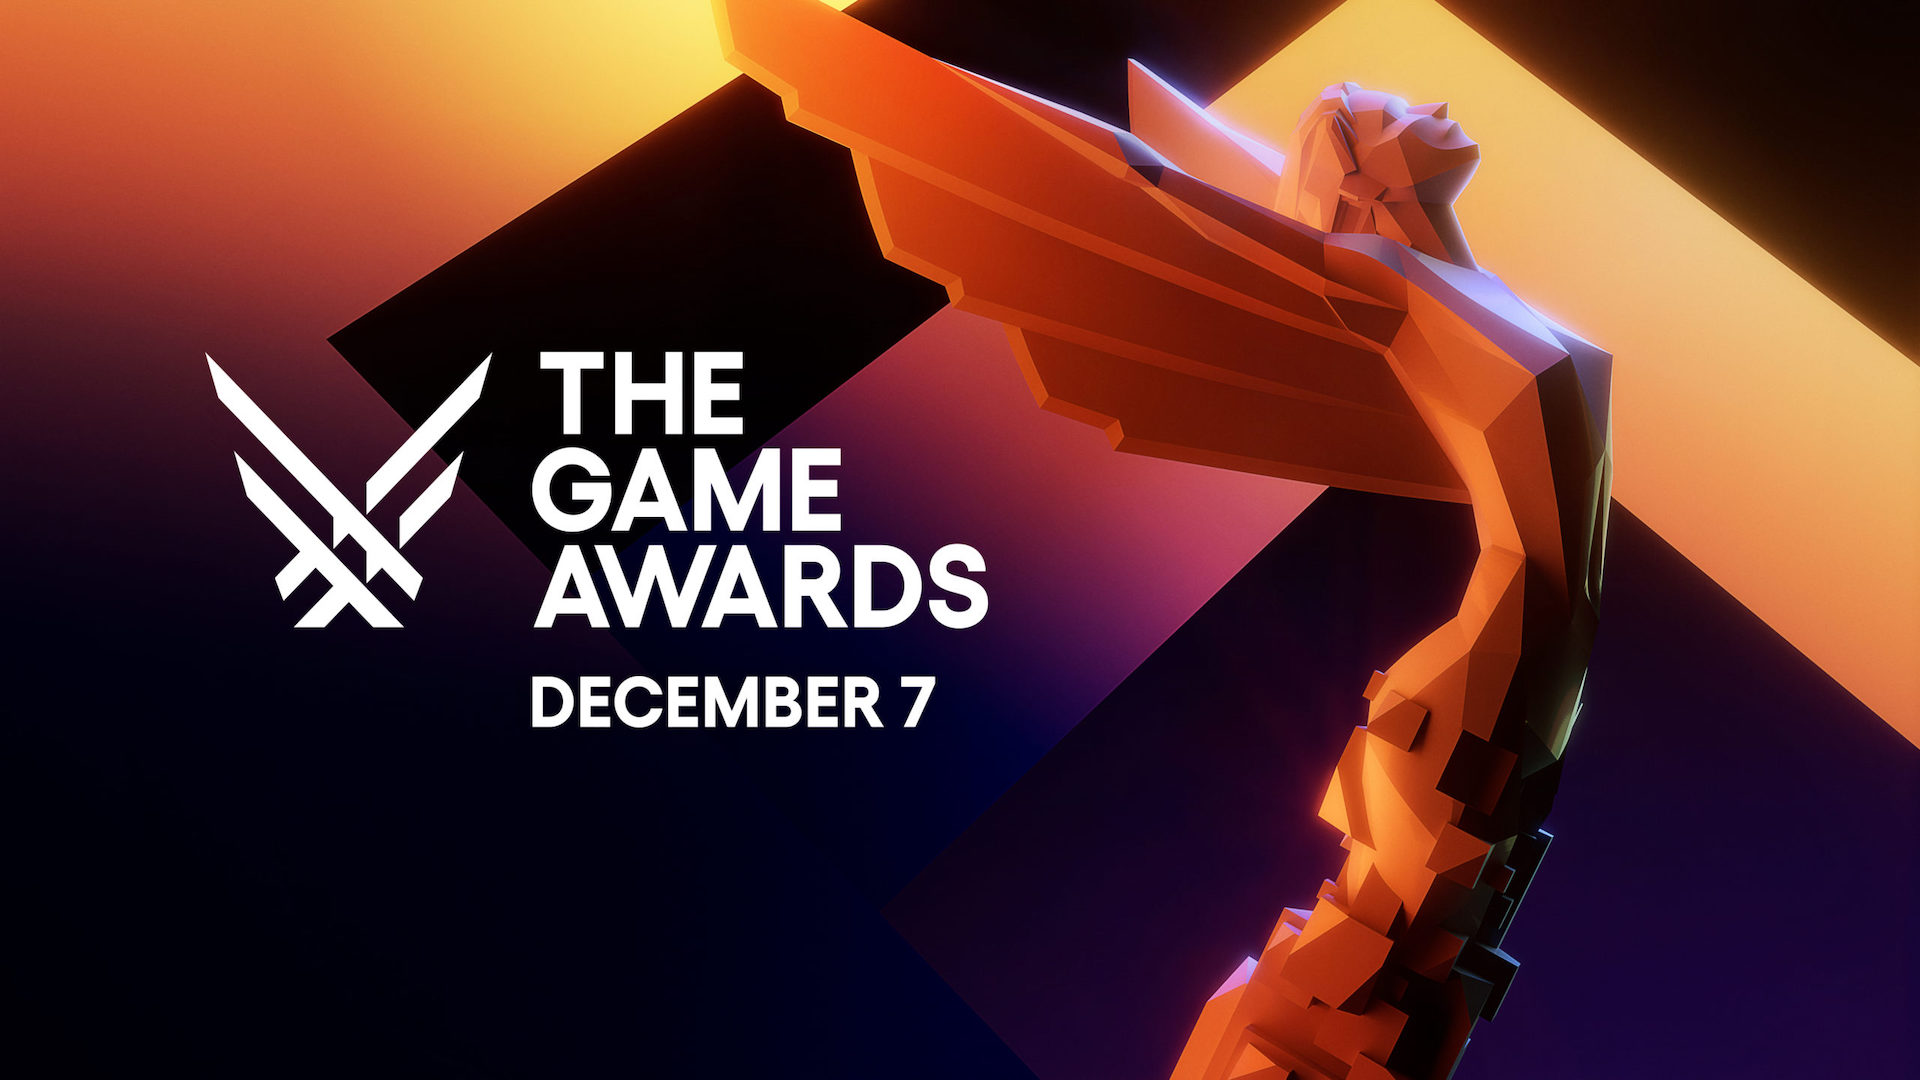 The Game Awards 2016 Nominee Announcement! 